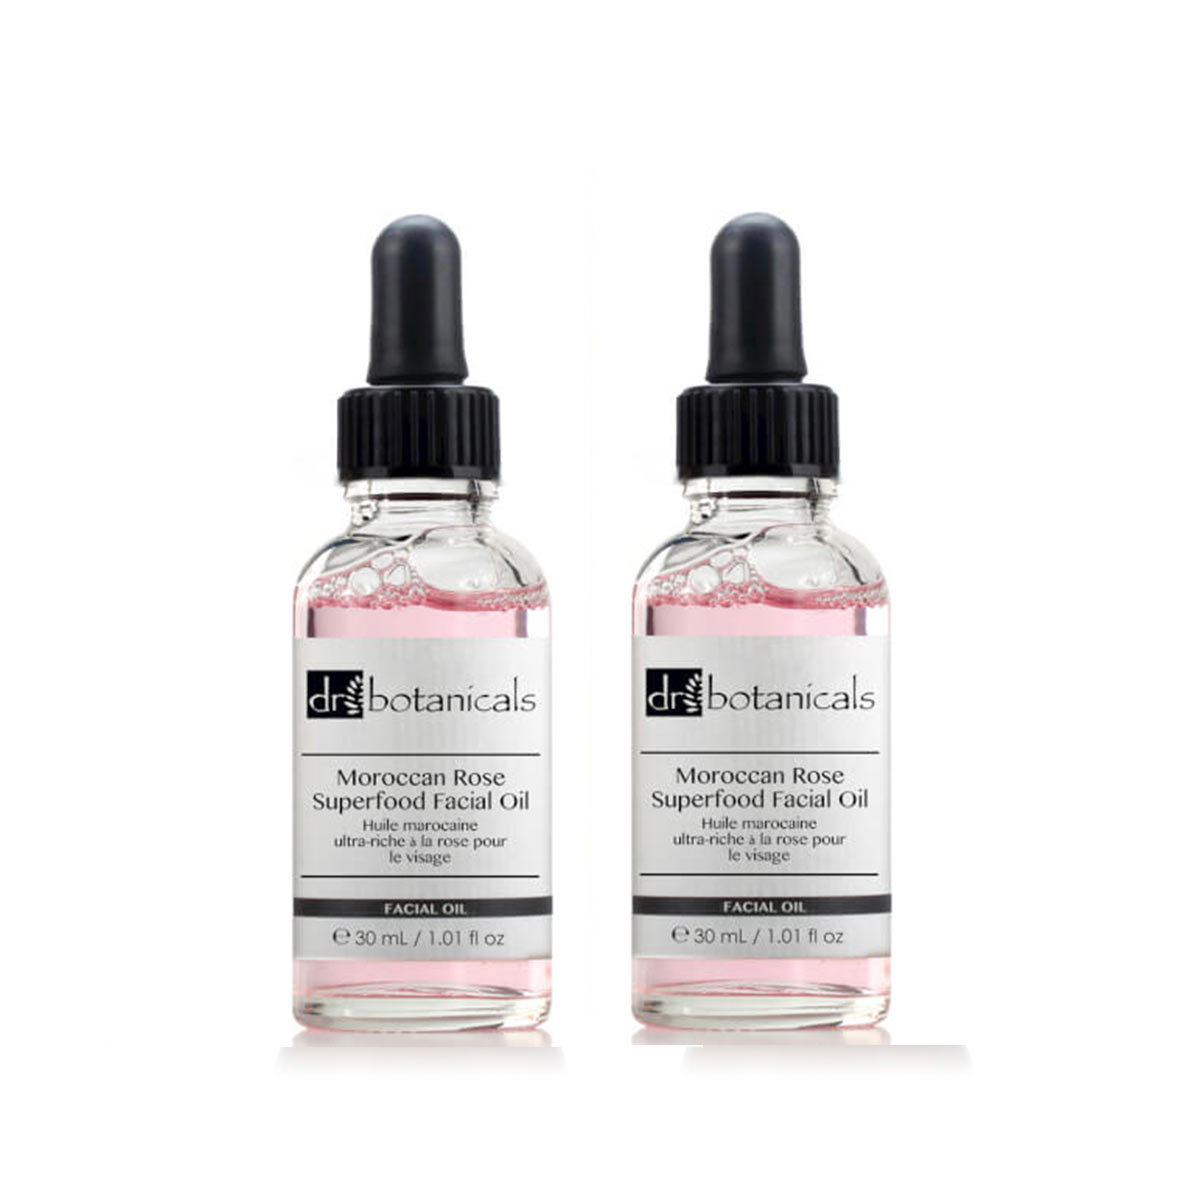 Dr Botanicals Moroccan Rose Superfood Facial Oil, 2 x 30ml